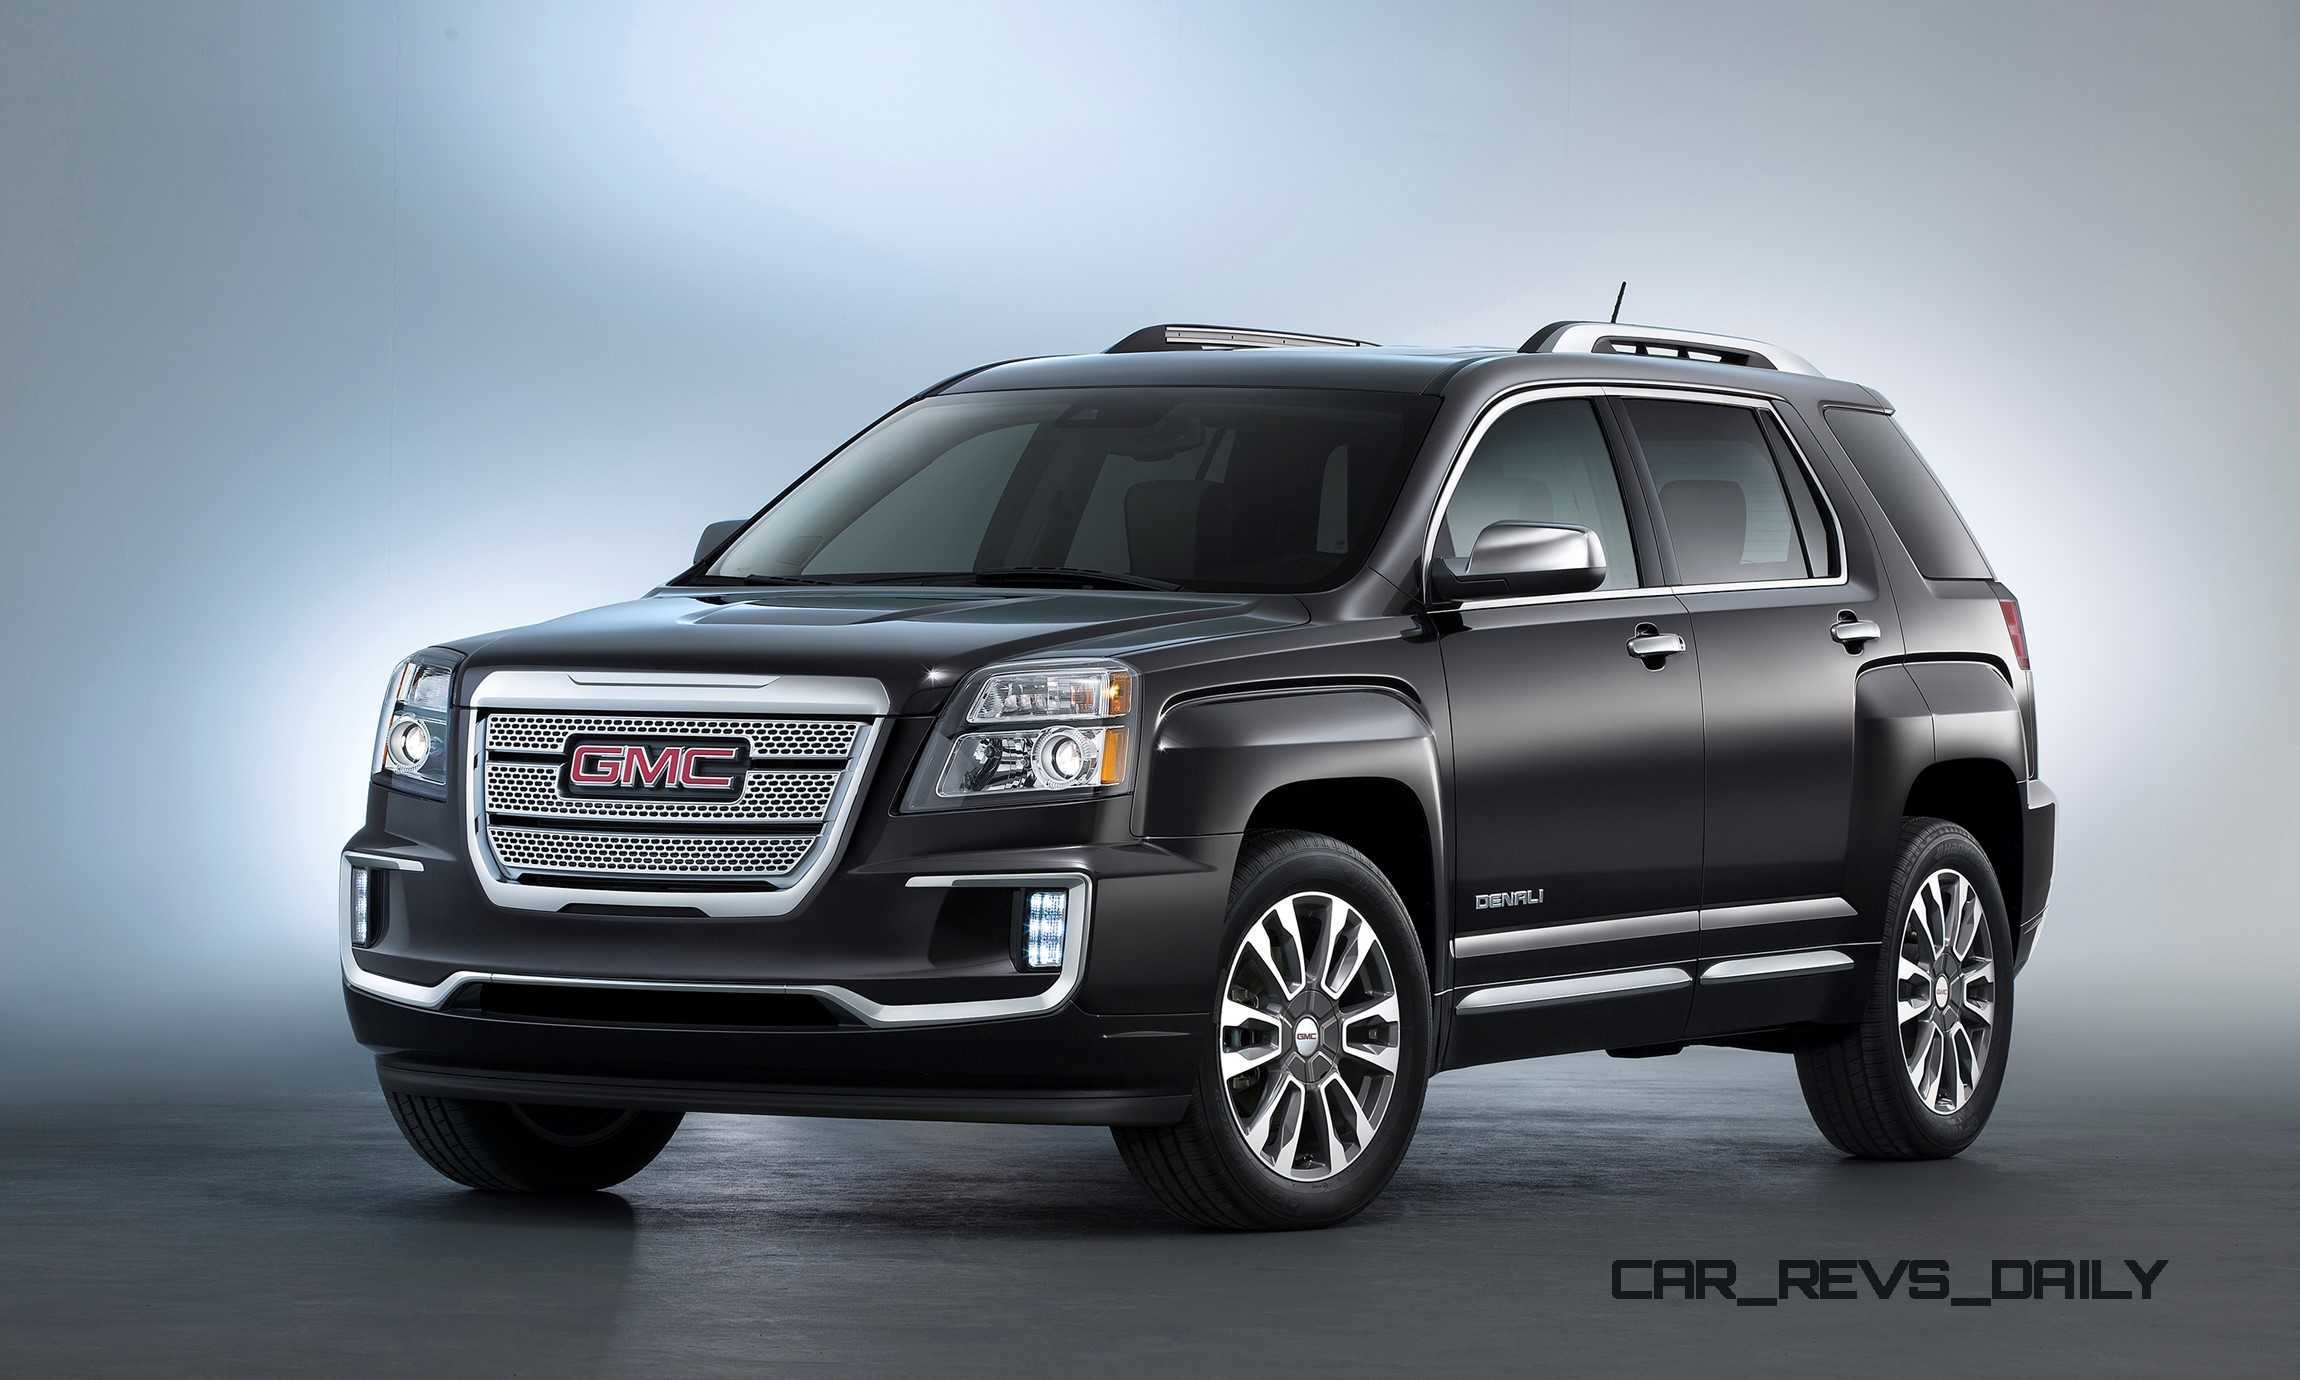 Interested in a new suv with great performance & features? 2016 GMC Terrain